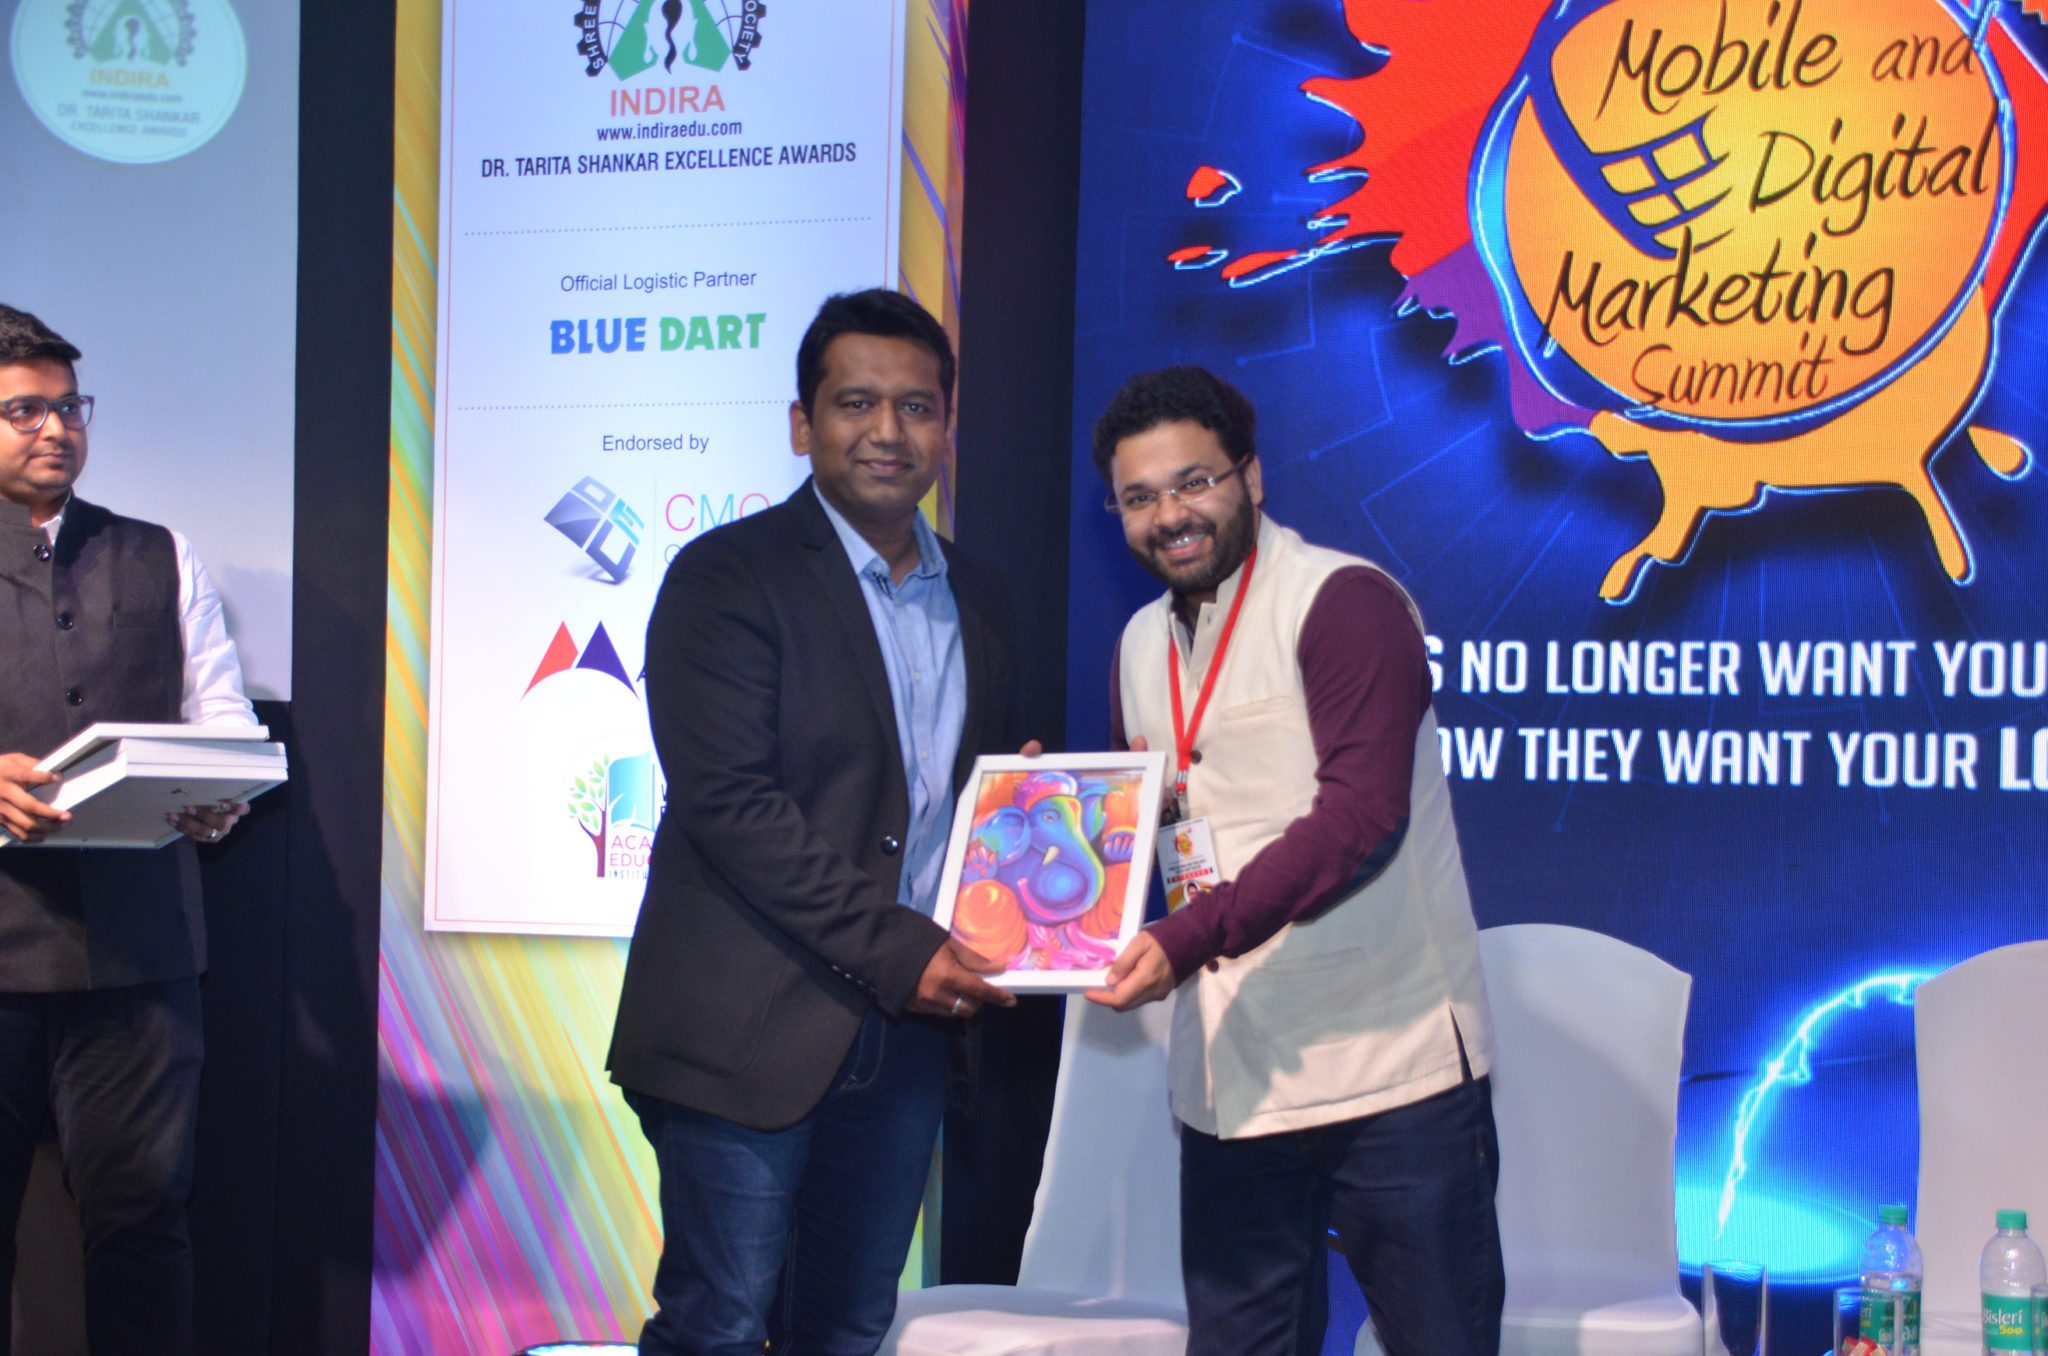 Our Founder and CEO, Akhil Chandra has been recognized as one of the '25  Most Influential Mobile Marketing Leaders' by the World Marketing Congress  - Studio MosaicStudio Mosaic